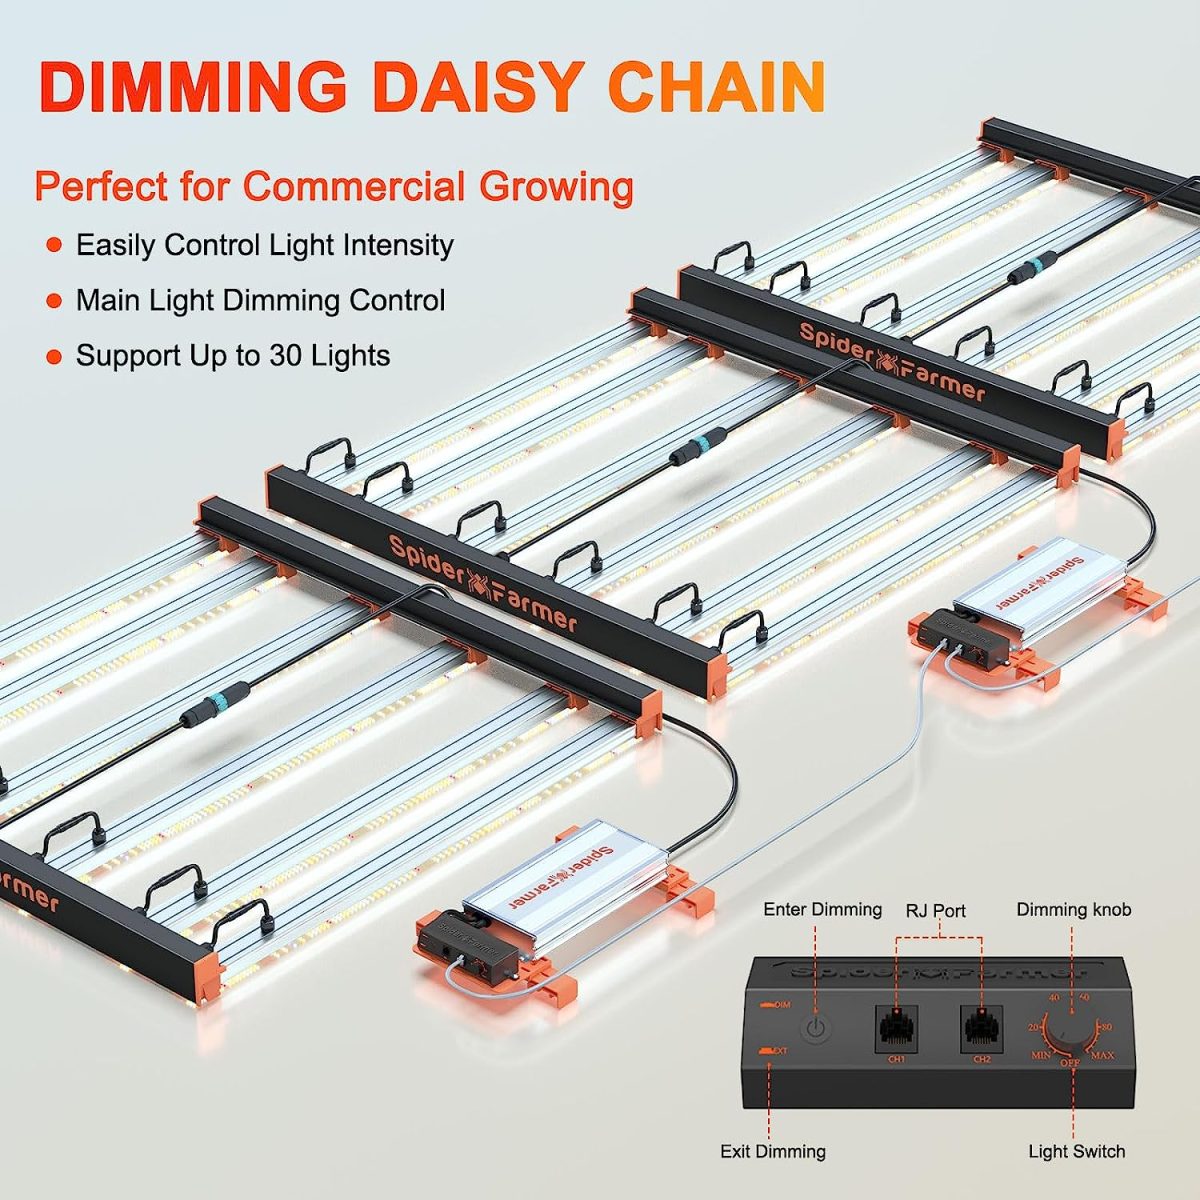 Dimming Daisy Chian function of SE-5000 LED